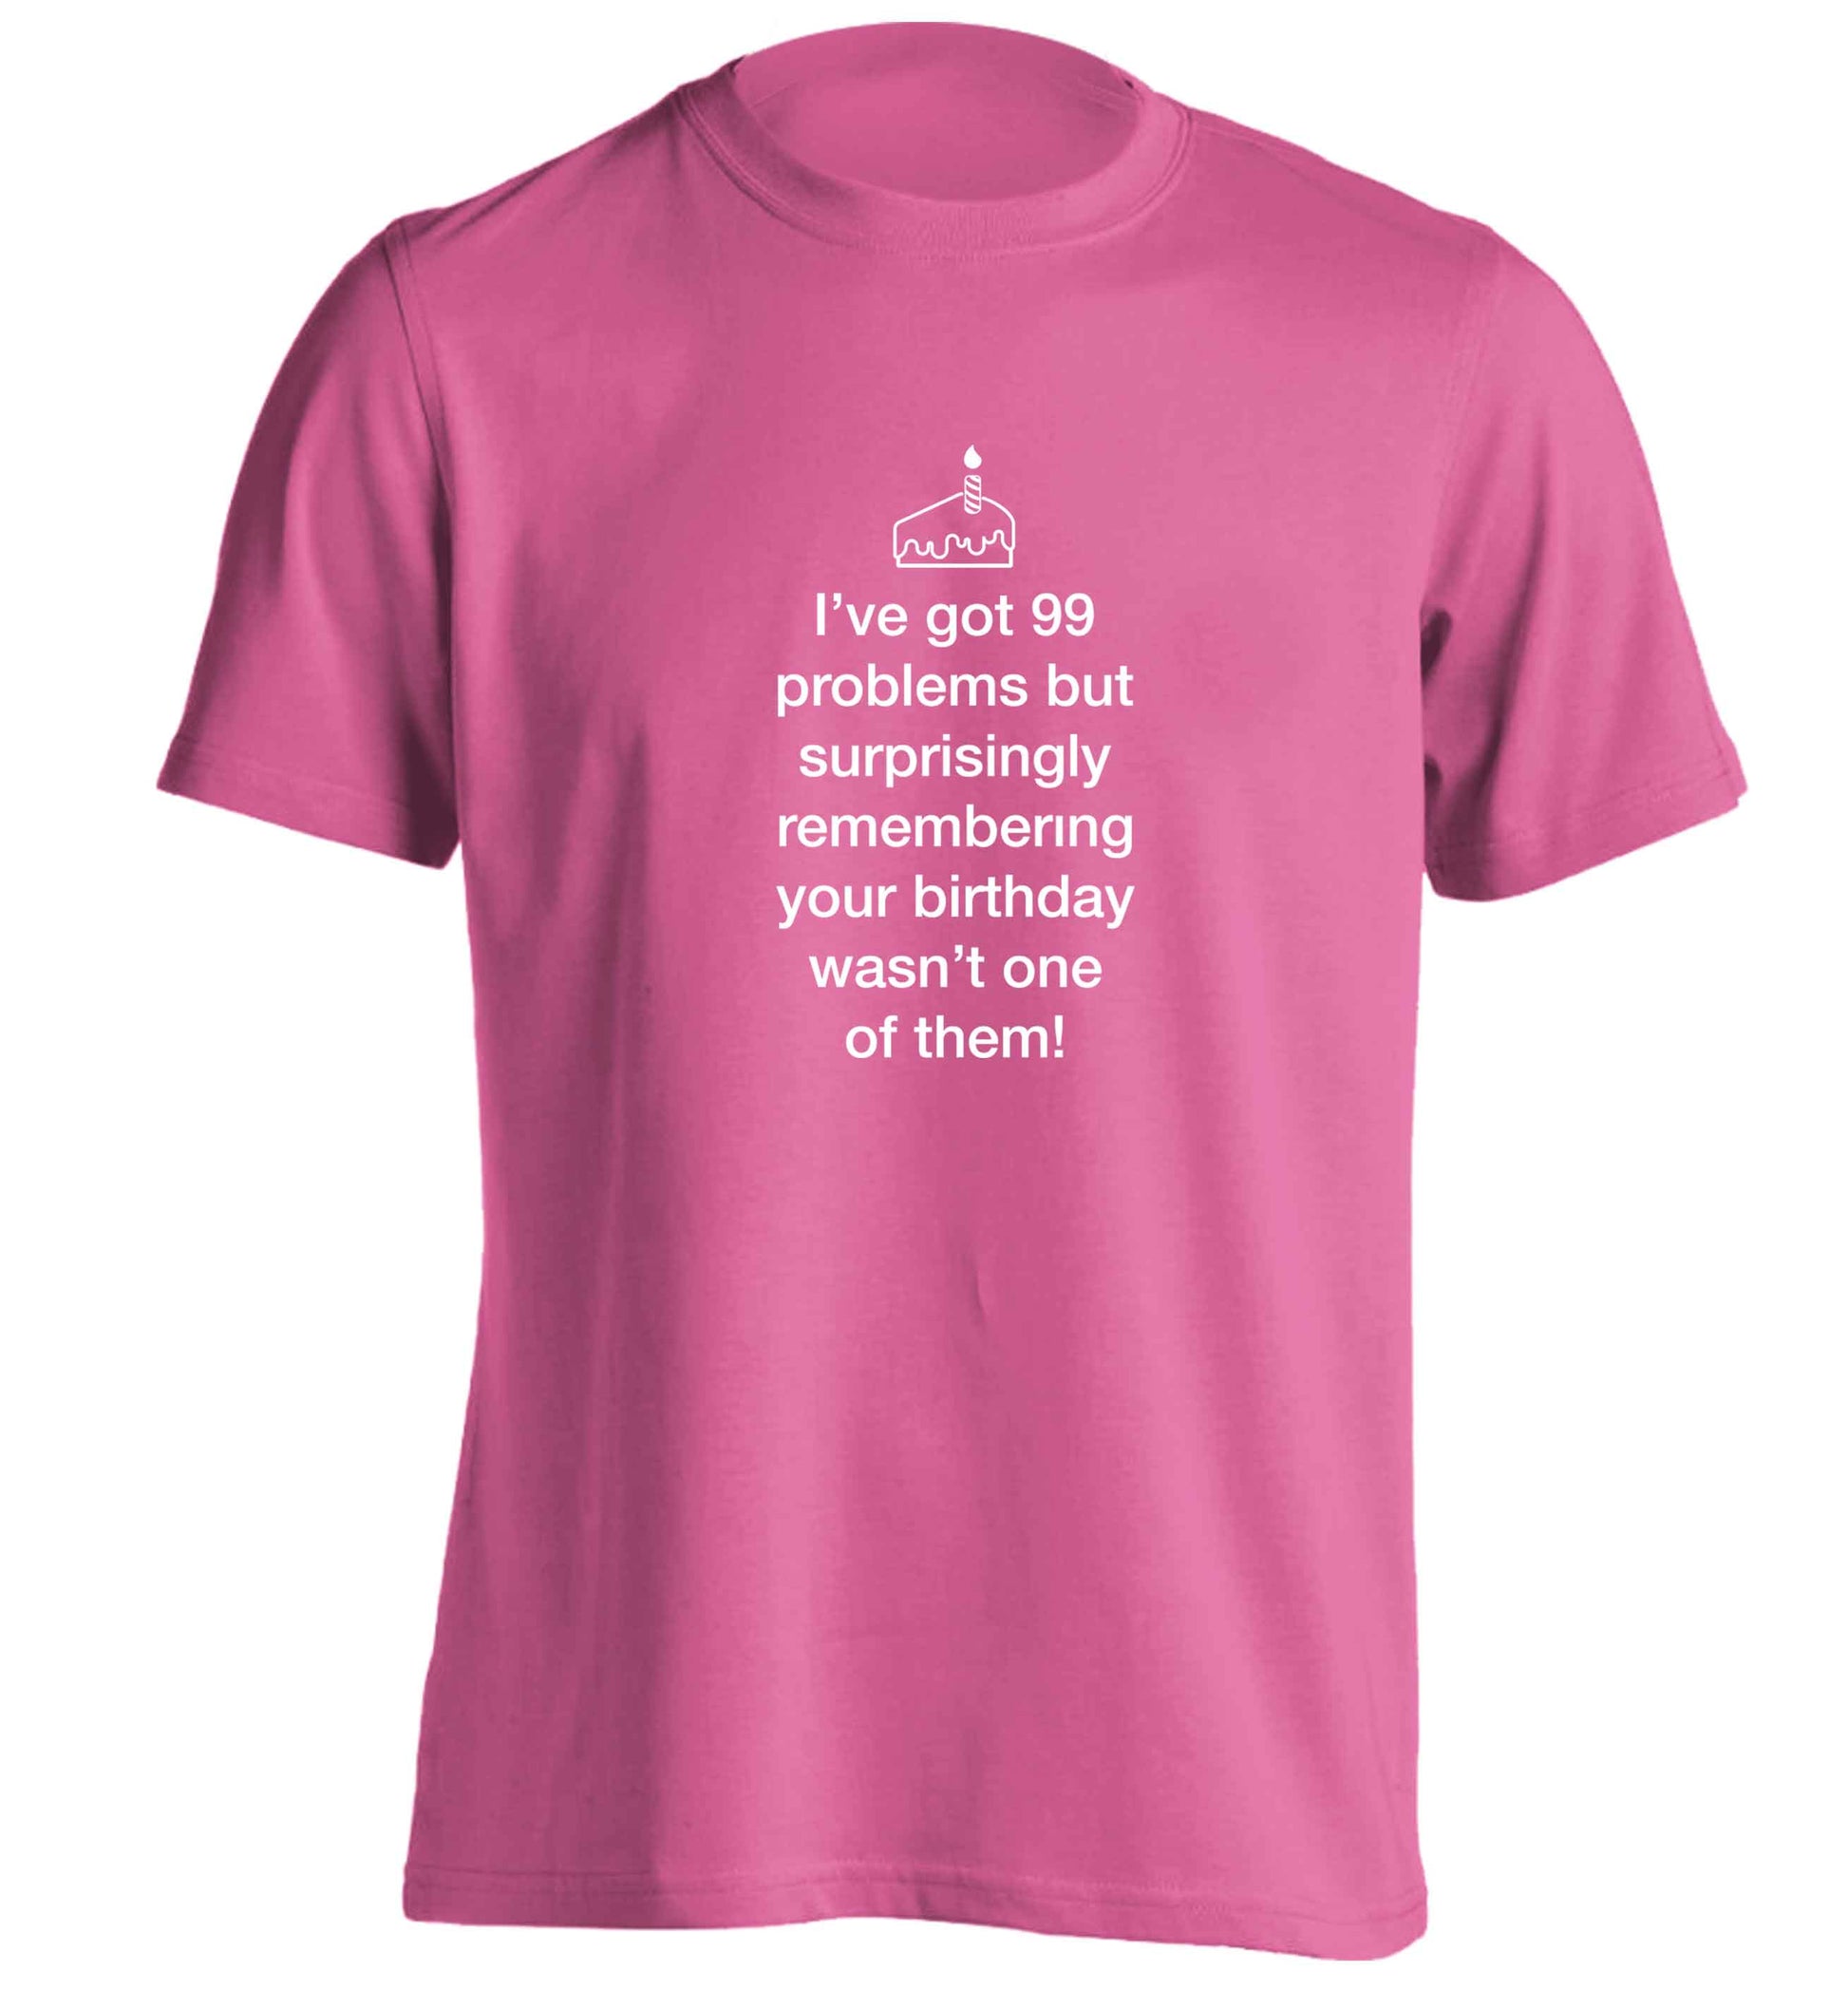 I've got 99 problems but surprisingly remembering your birthday wasn't one of them! adults unisex pink Tshirt 2XL